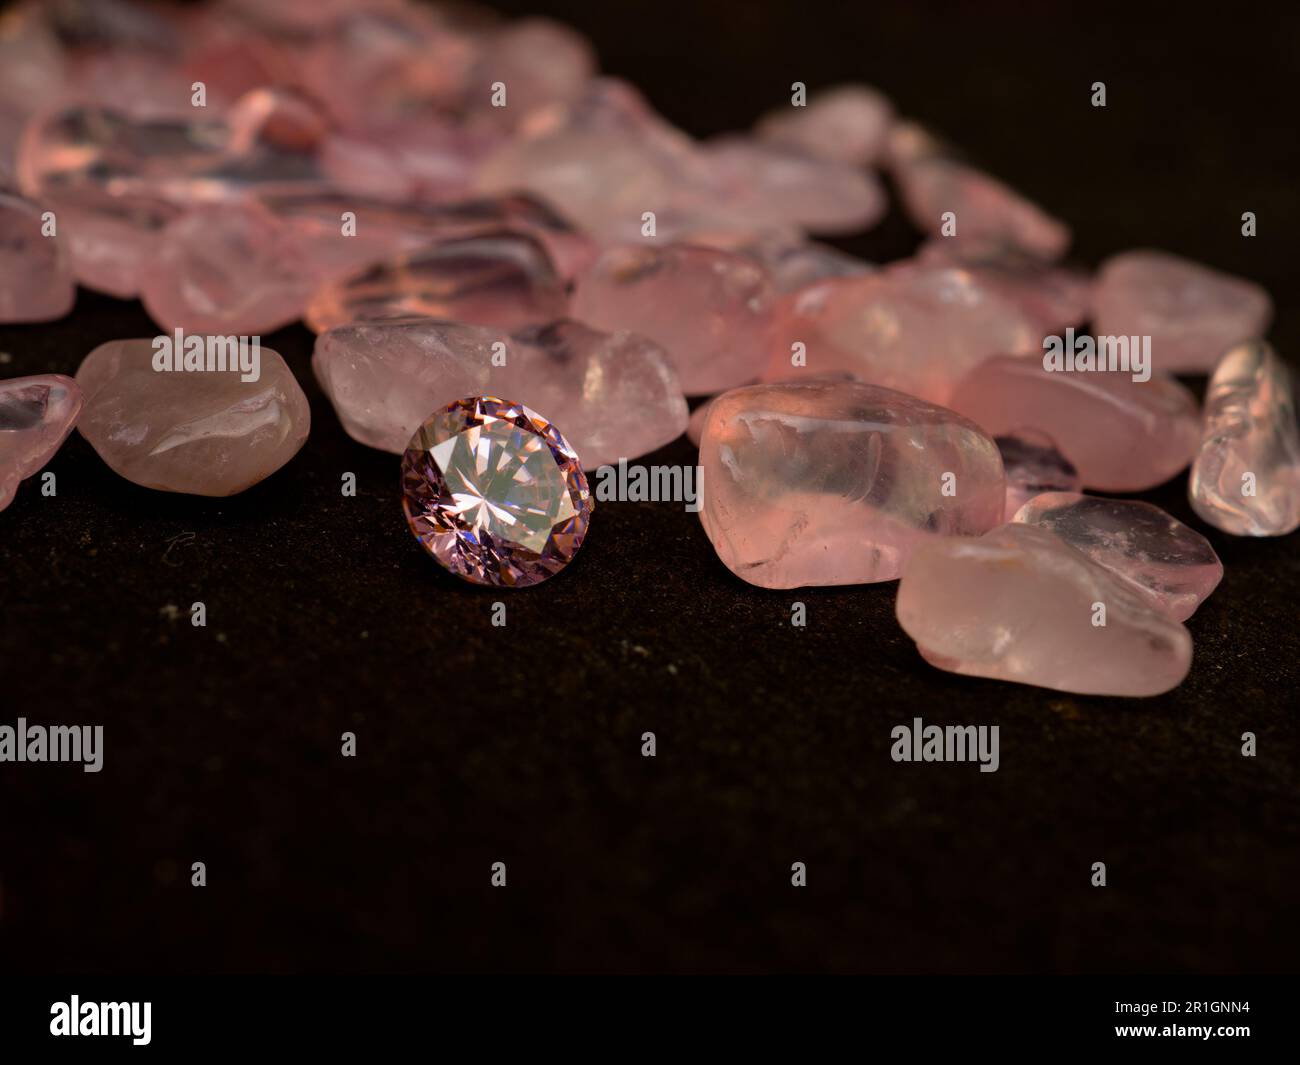 Round cut pink colored diamond and tumbled crystals on black background Stock Photo